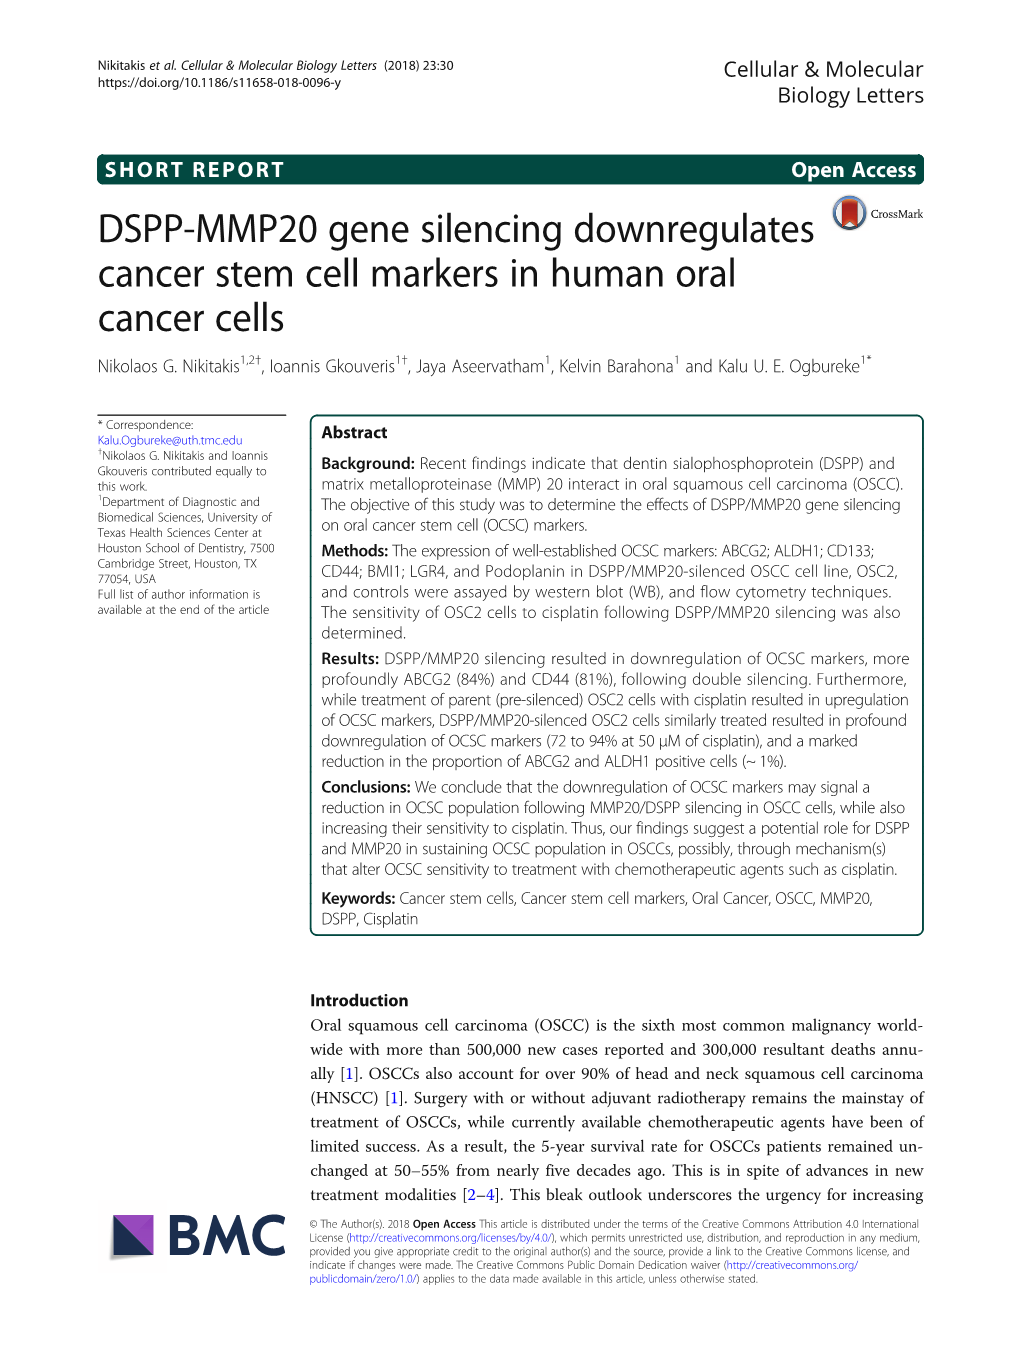 DSPP-MMP20 Gene Silencing Downregulates Cancer Stem Cell Markers in Human Oral Cancer Cells Nikolaos G